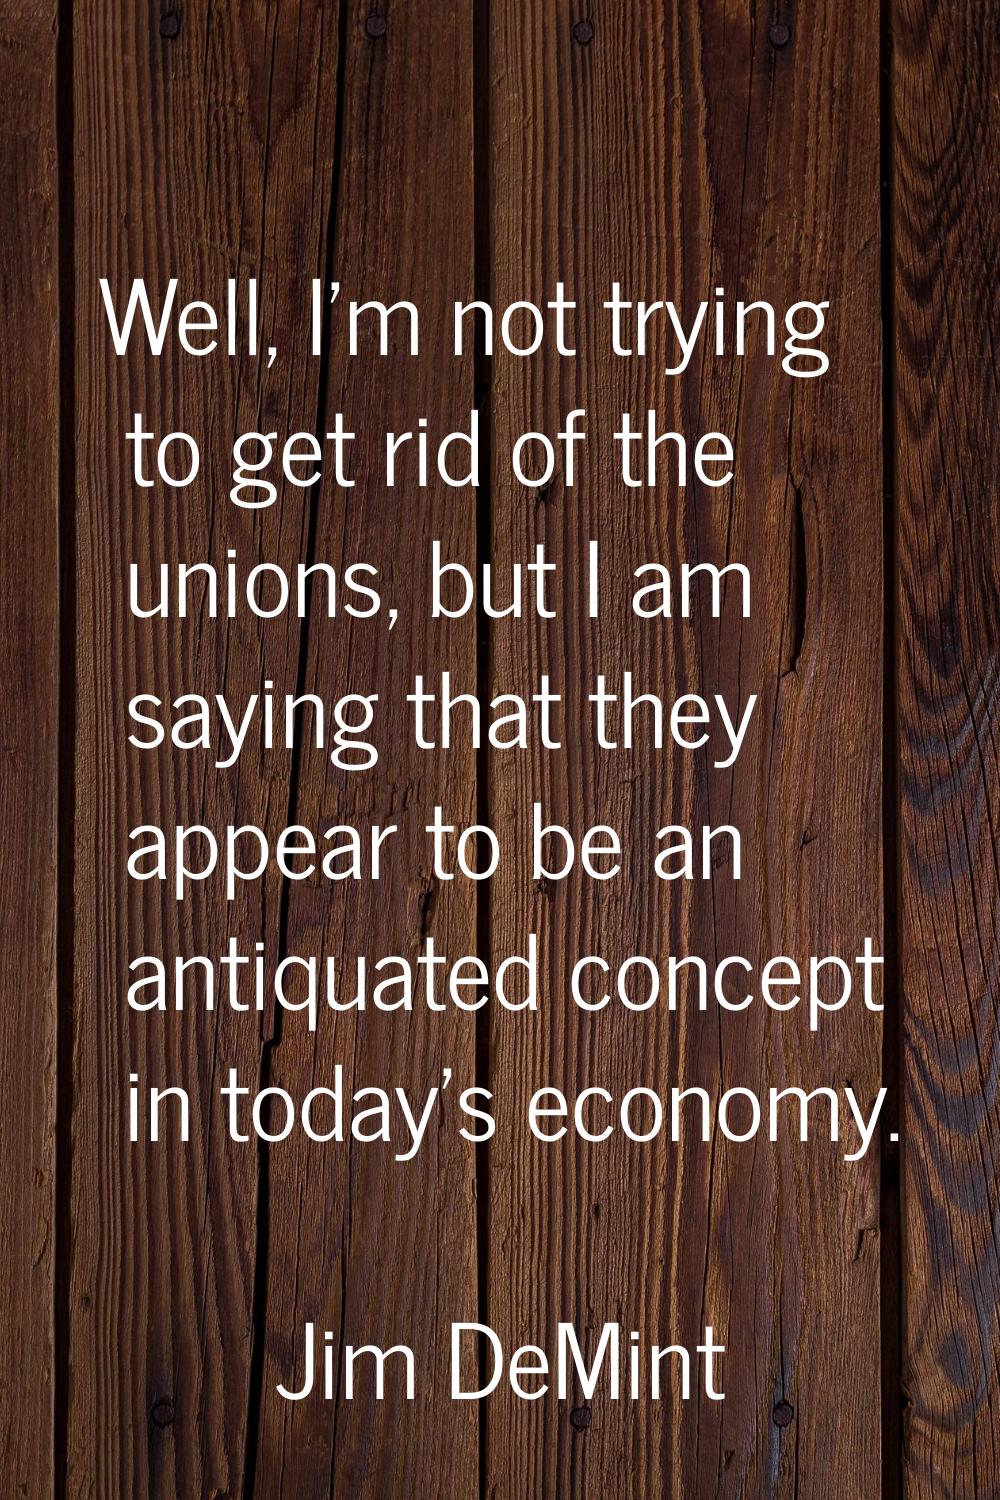 Well, I'm not trying to get rid of the unions, but I am saying that they appear to be an antiquated